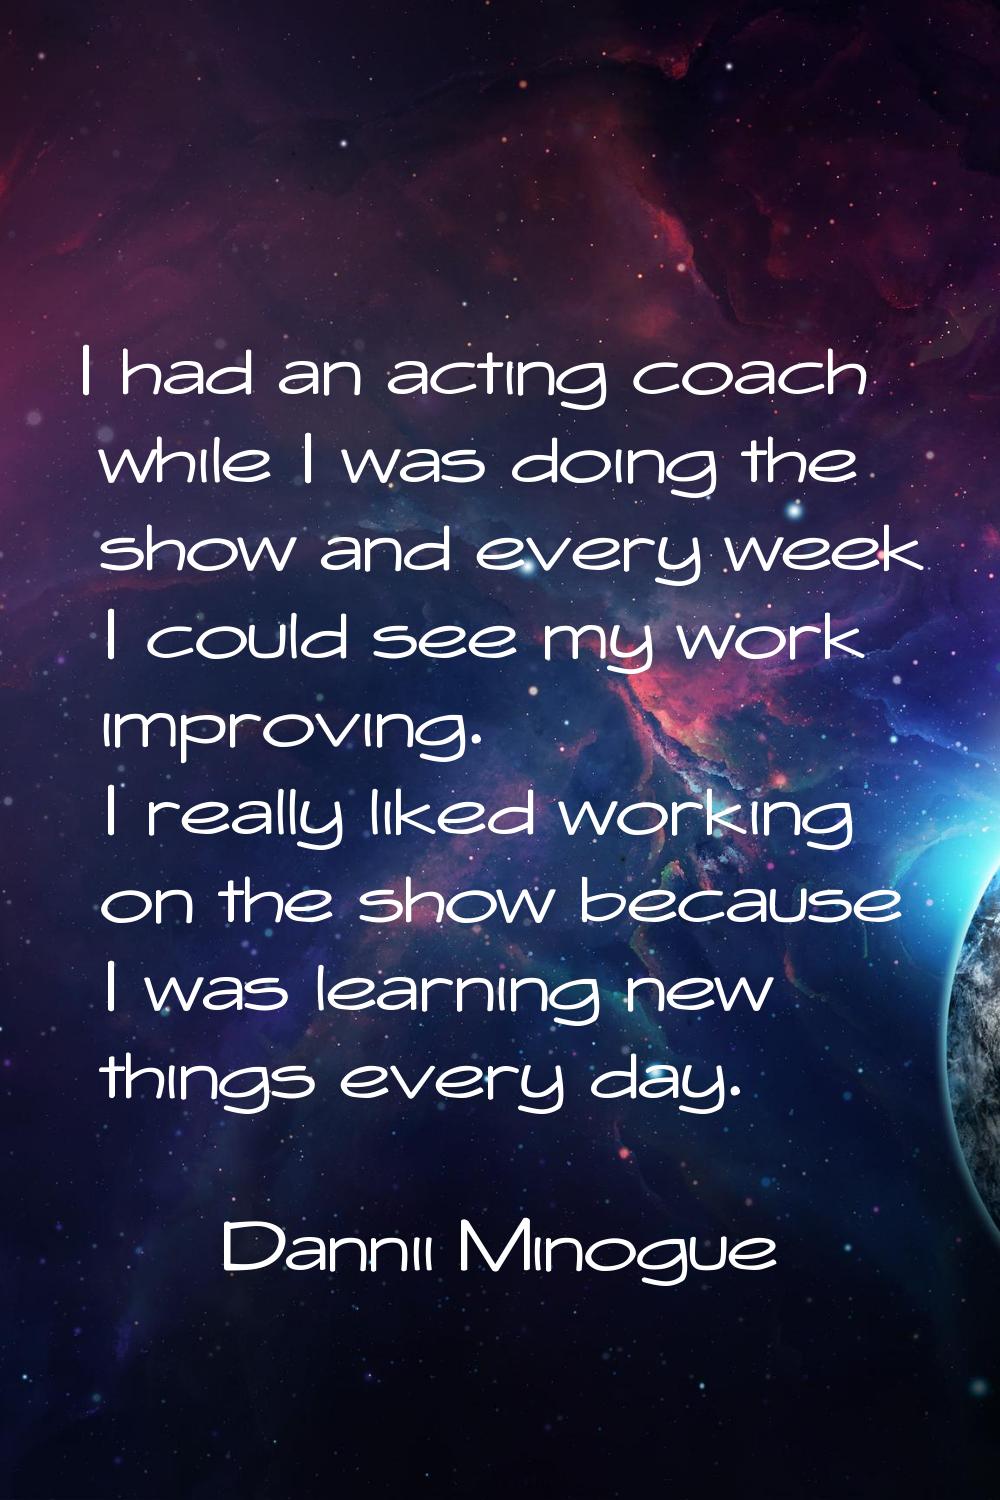 I had an acting coach while I was doing the show and every week I could see my work improving. I re